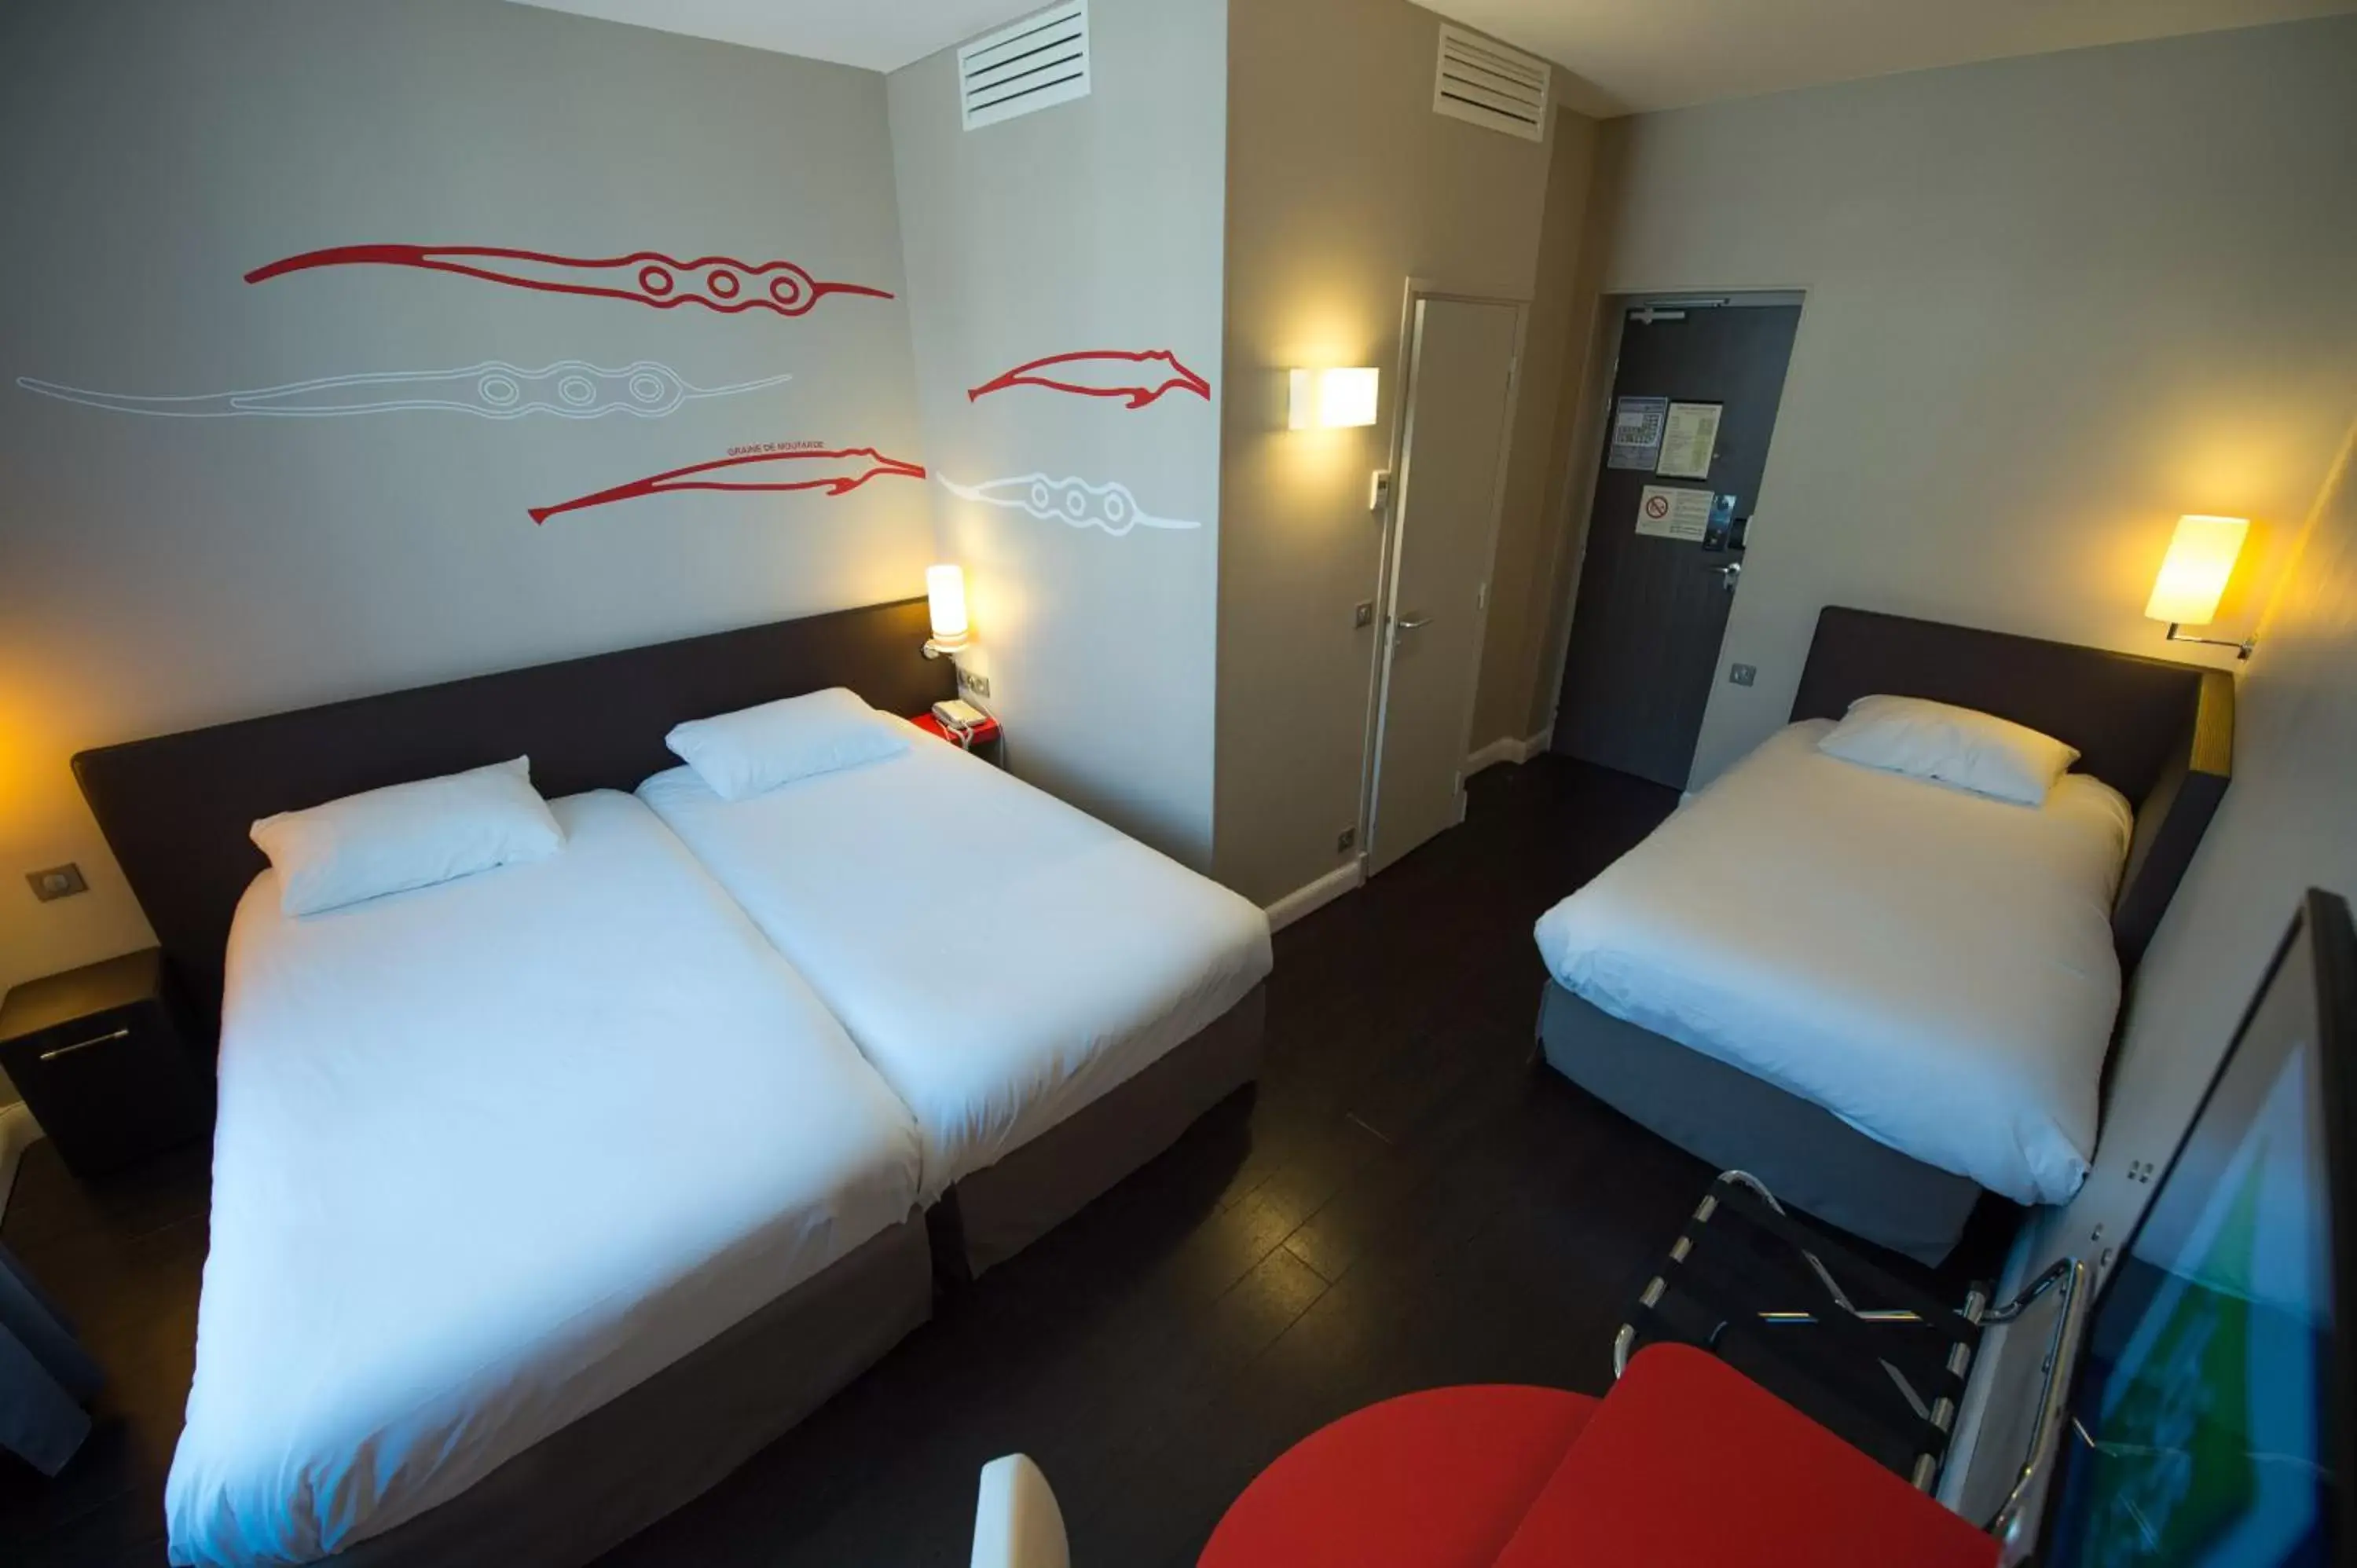 Bed, Room Photo in ibis Styles Dijon Central